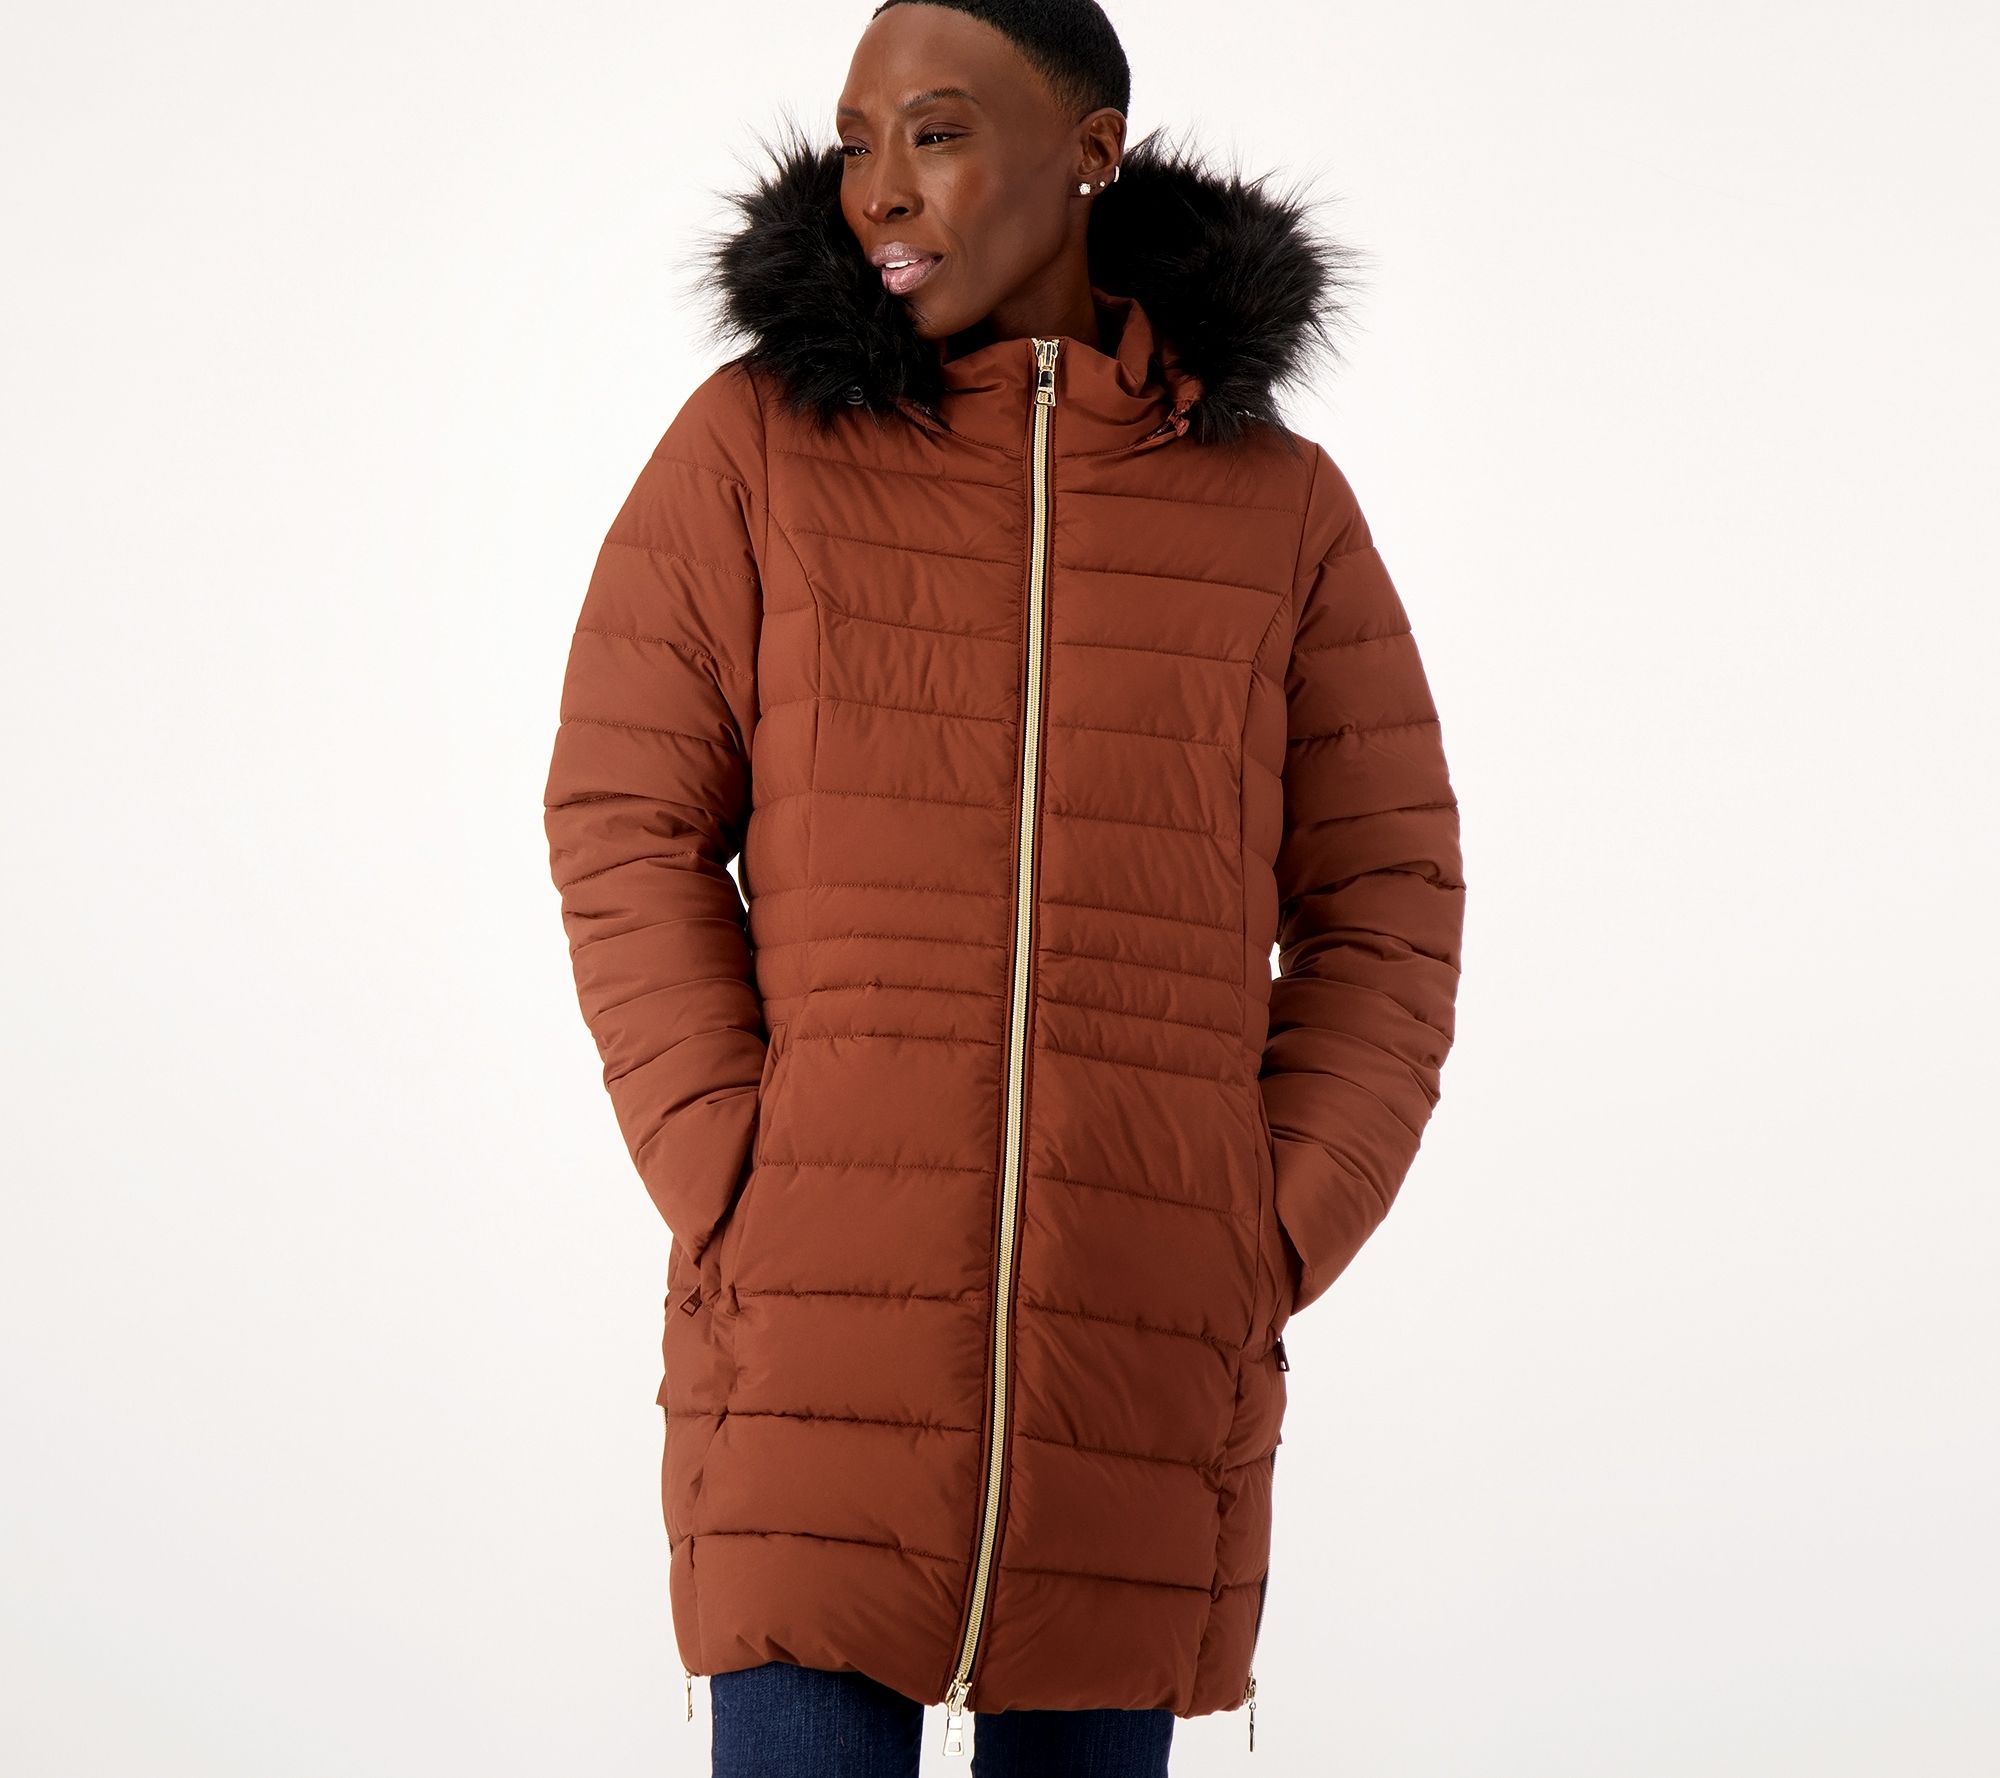 Hollister Hollister Faux Fur-Lined All-Weather Winter Jacket 120.00